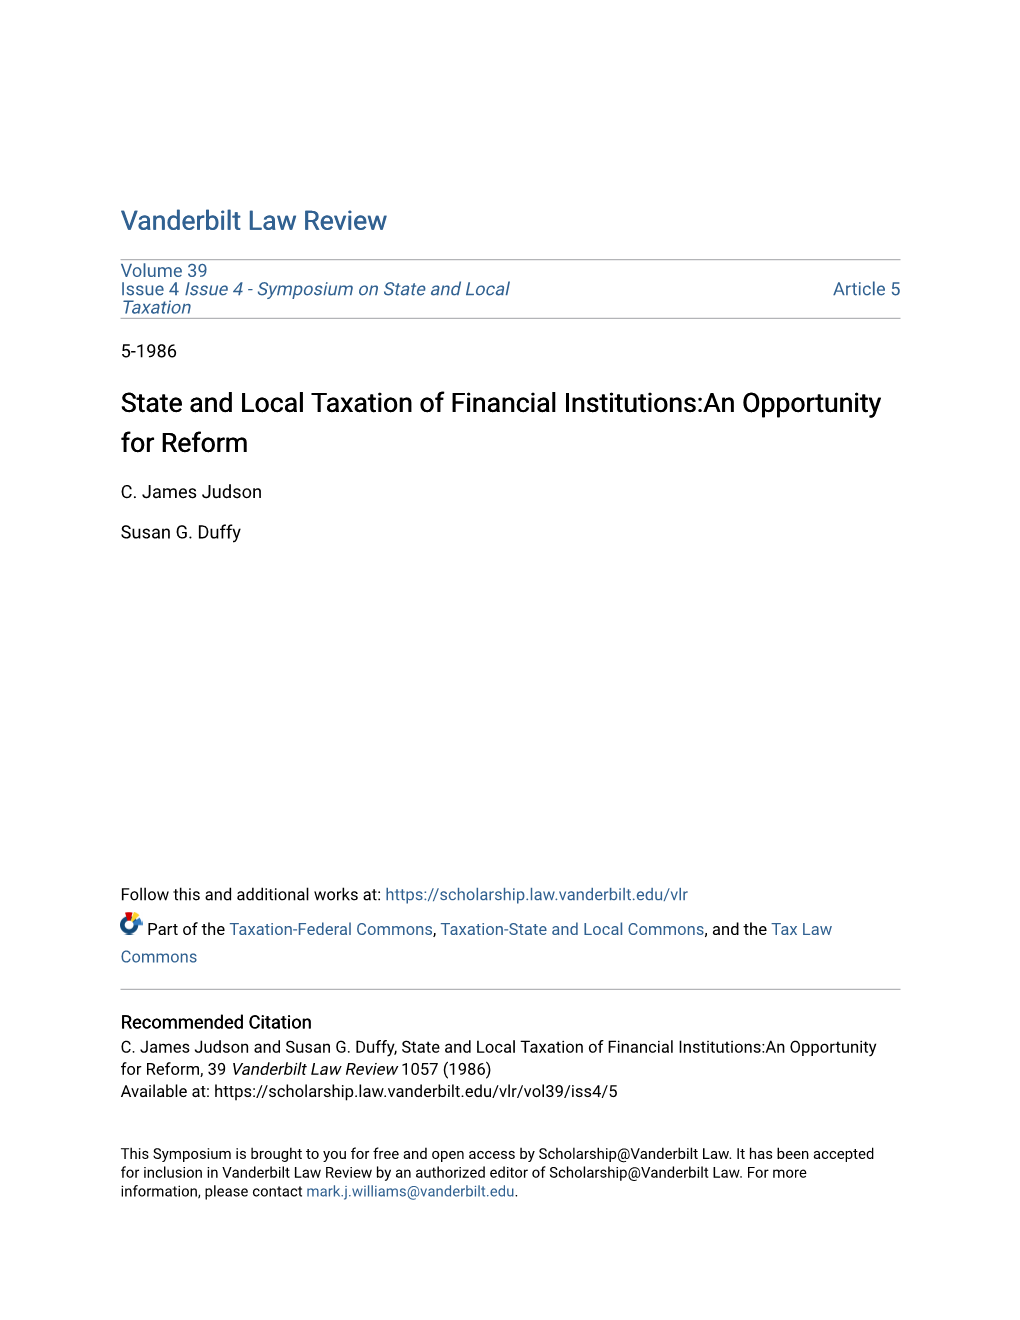 State and Local Taxation of Financial Institutions:An Opportunity for Reform